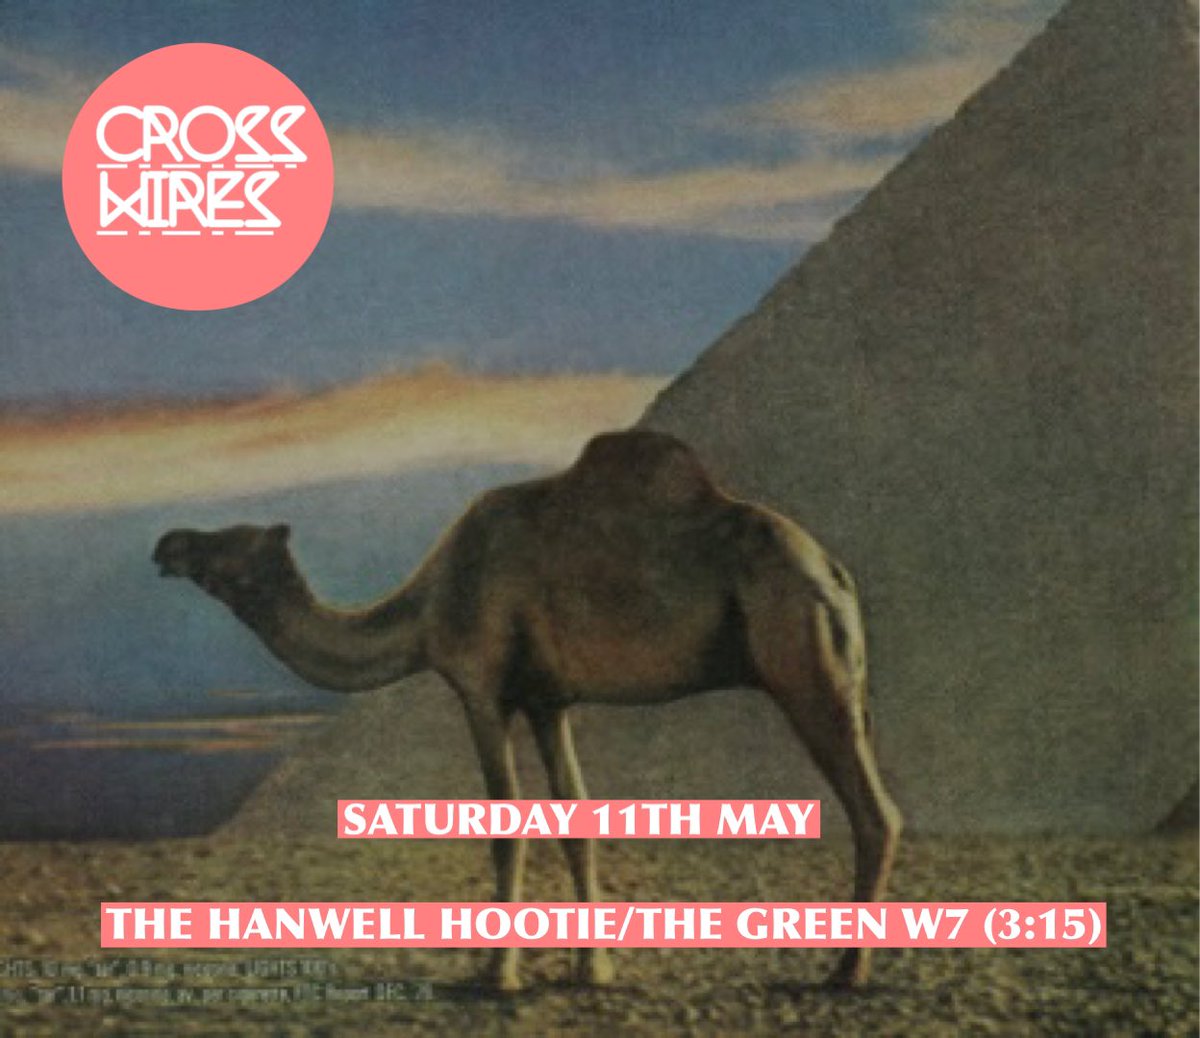 This Saturday we play @HanwellHootie London’s biggest free one day music festival. You can catch us at The Green W7 (on stage 3:15)